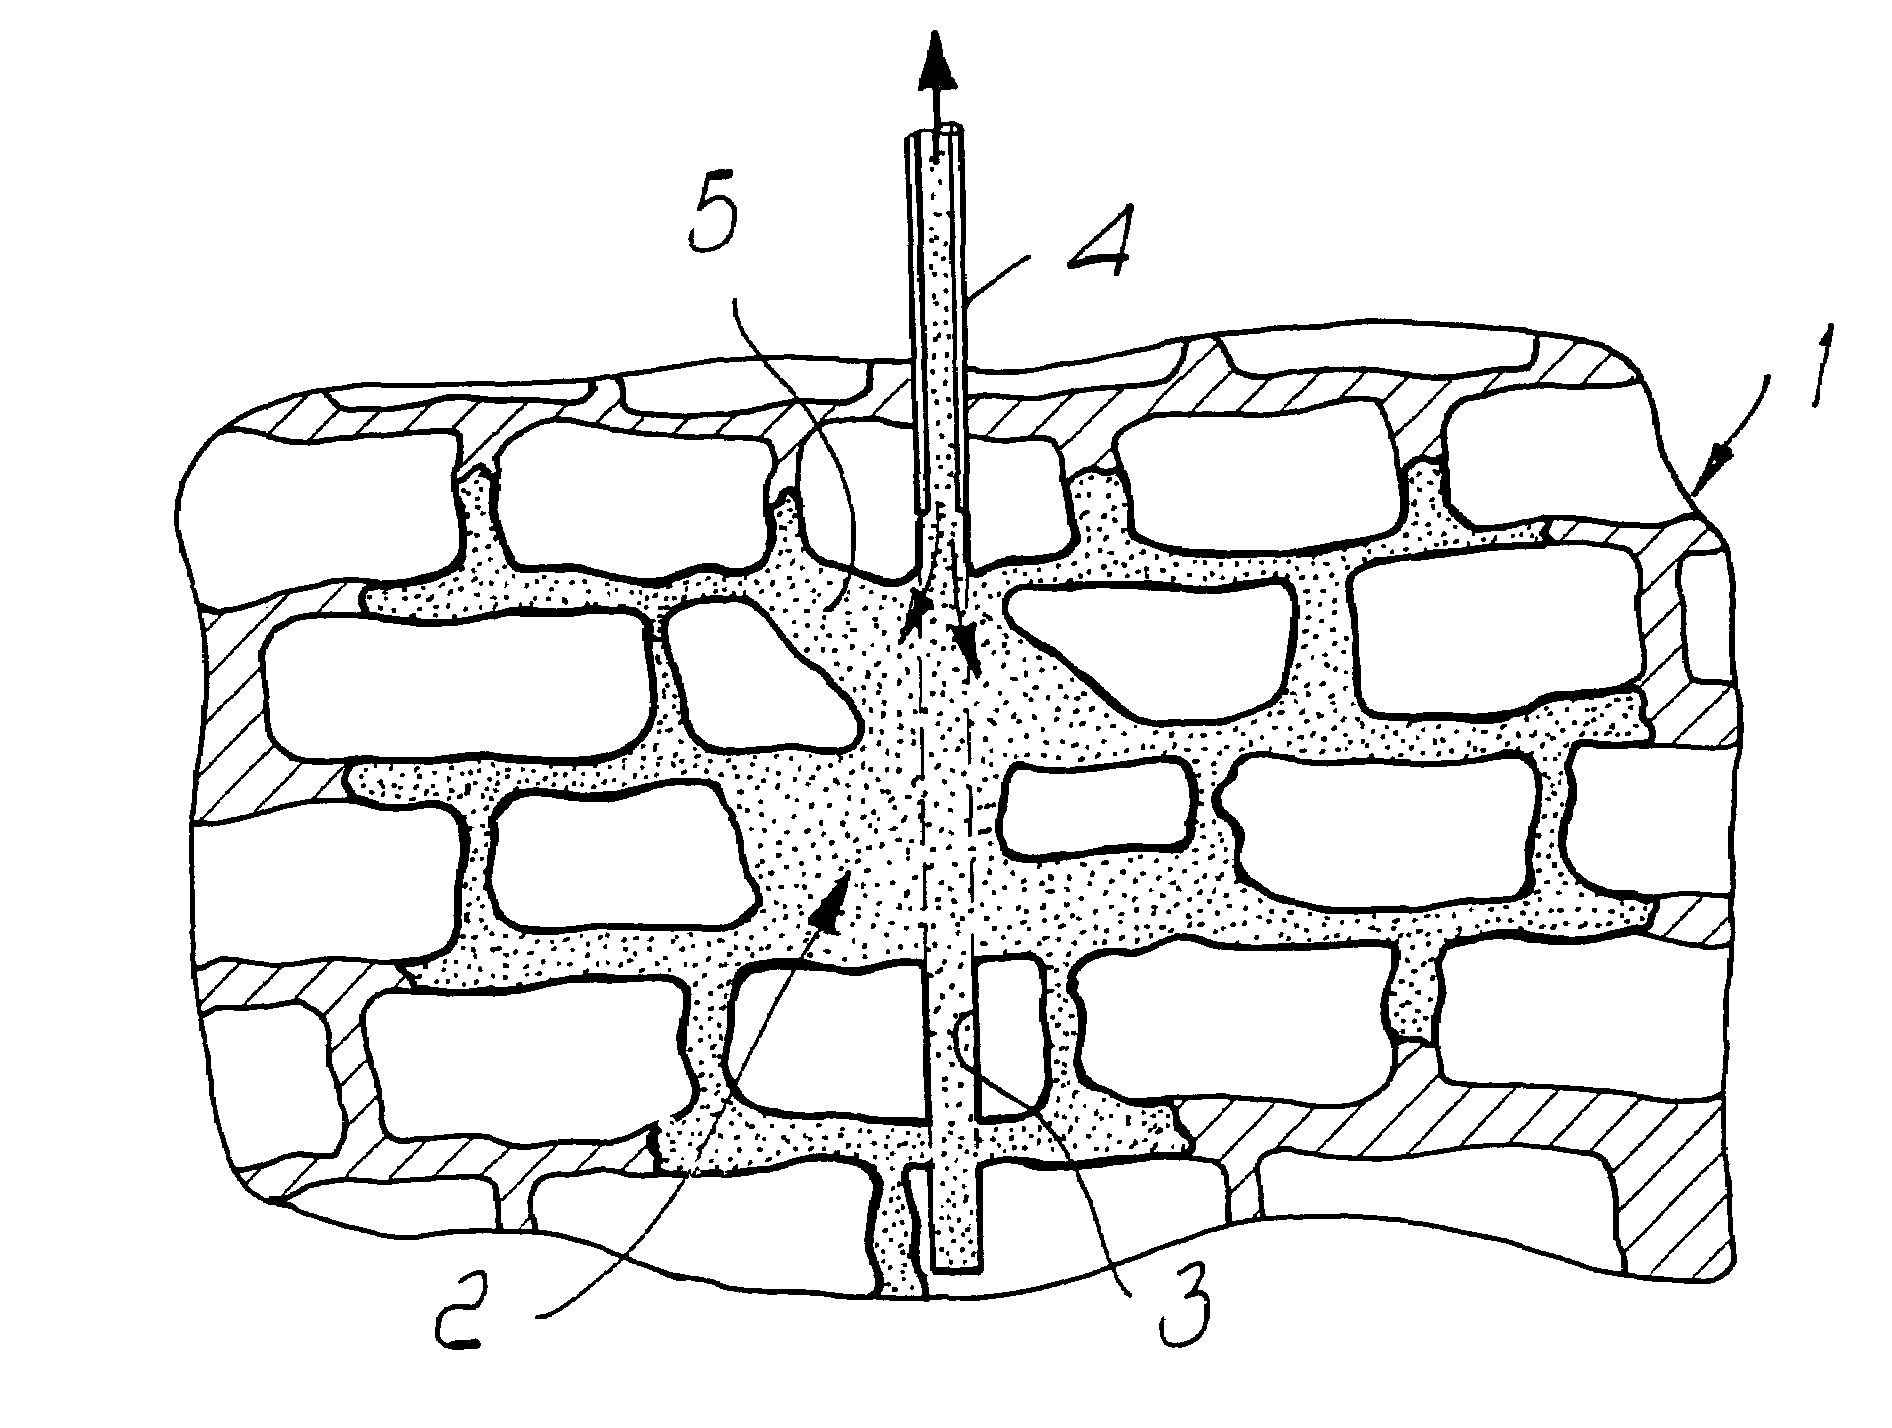 Method for repairing, waterproofing, insulating, reinforcing, restoring of wall systems